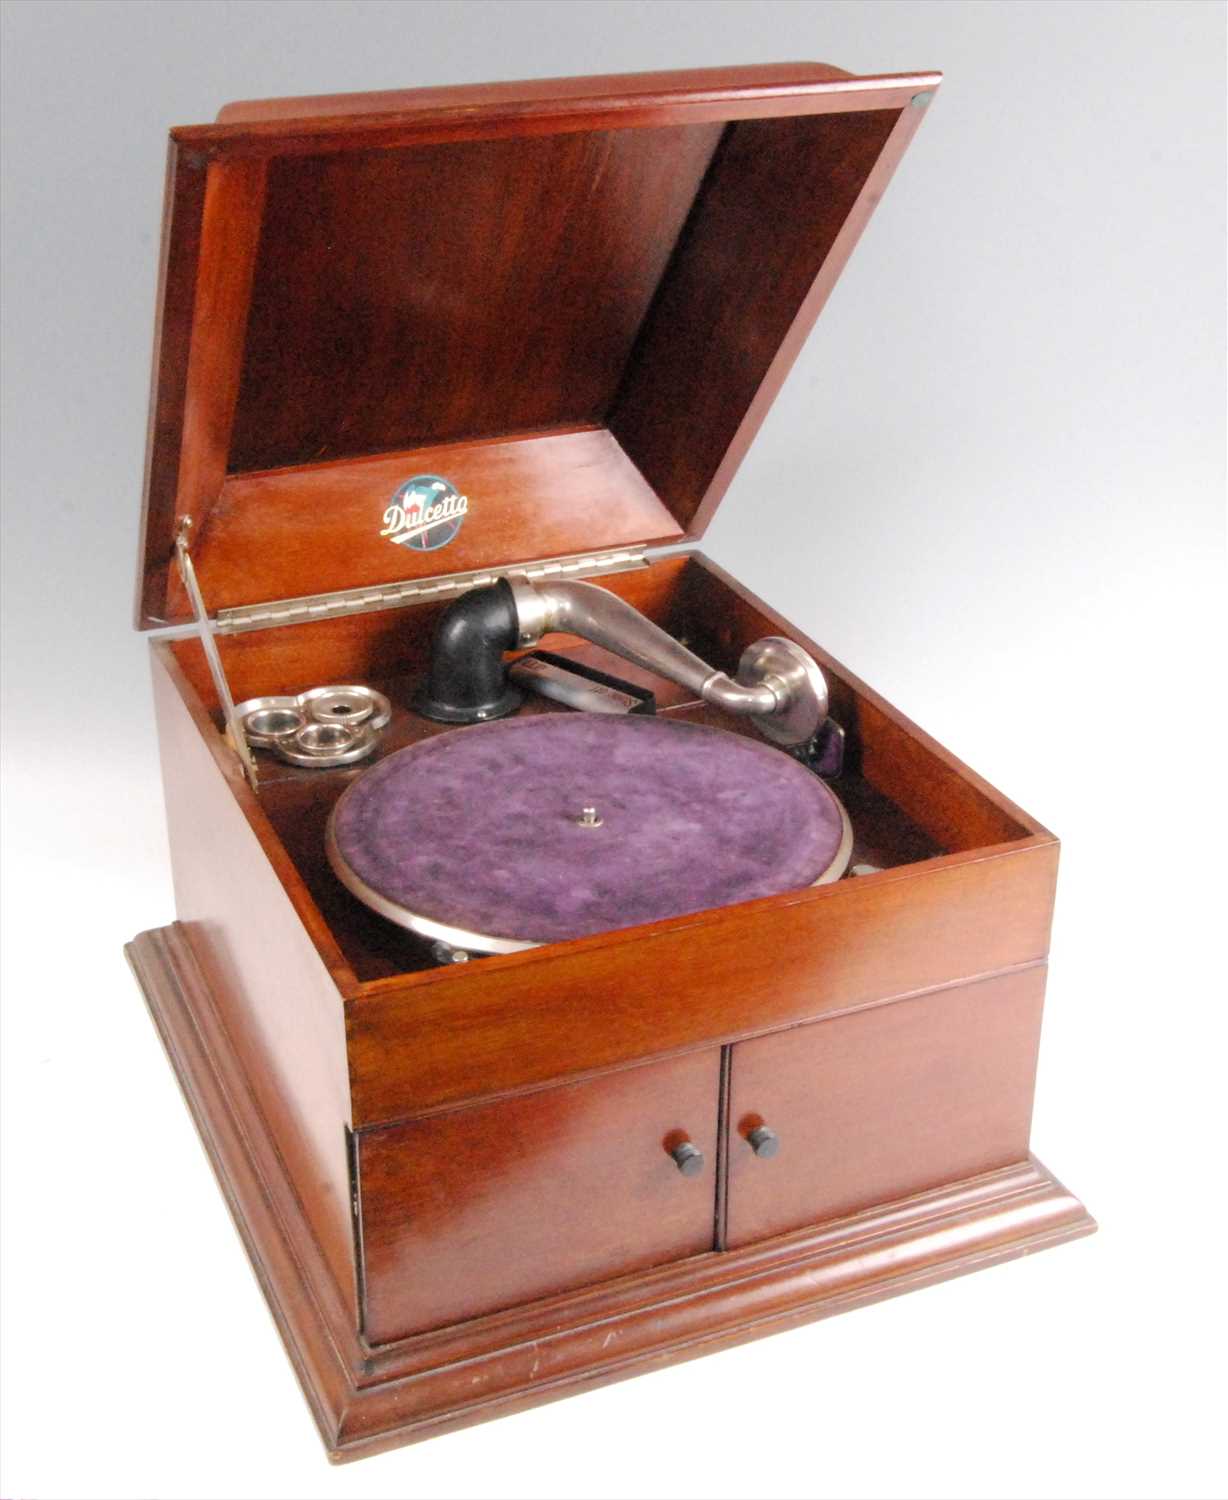 Lot 506 - A 1920's mahogany cased Dulcetto table top gramophone